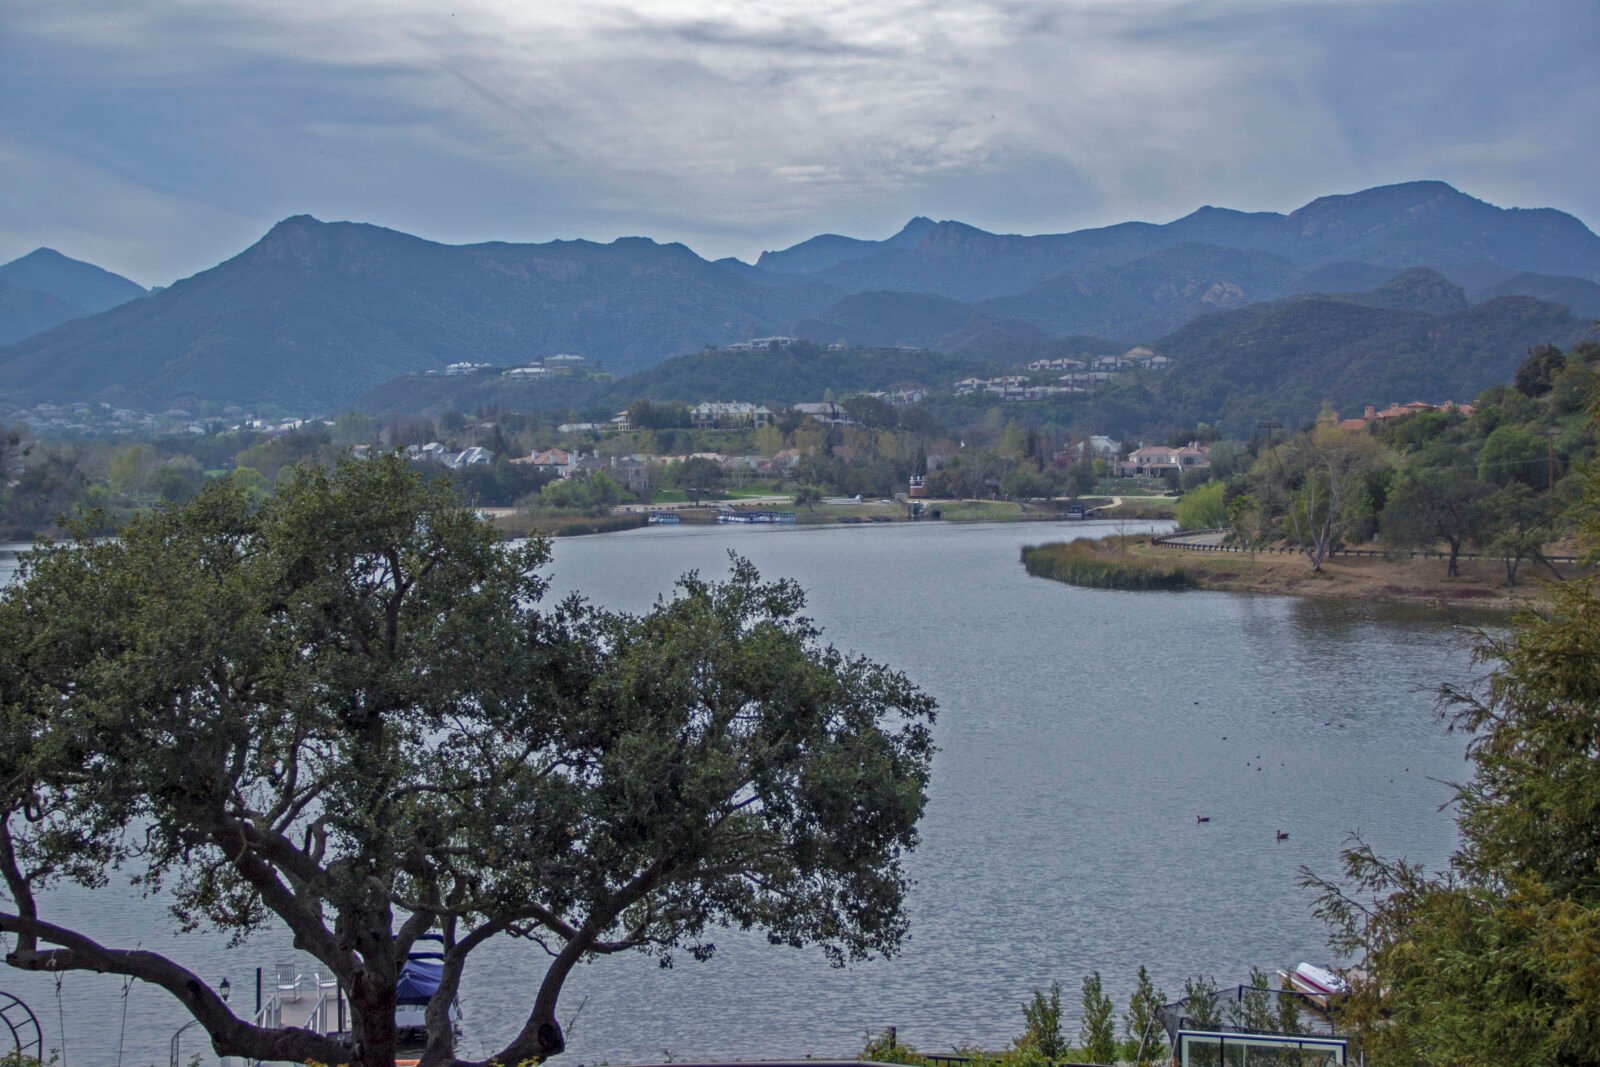 panoramic view of lake sherwood in westlake village, california, with mountains in the background